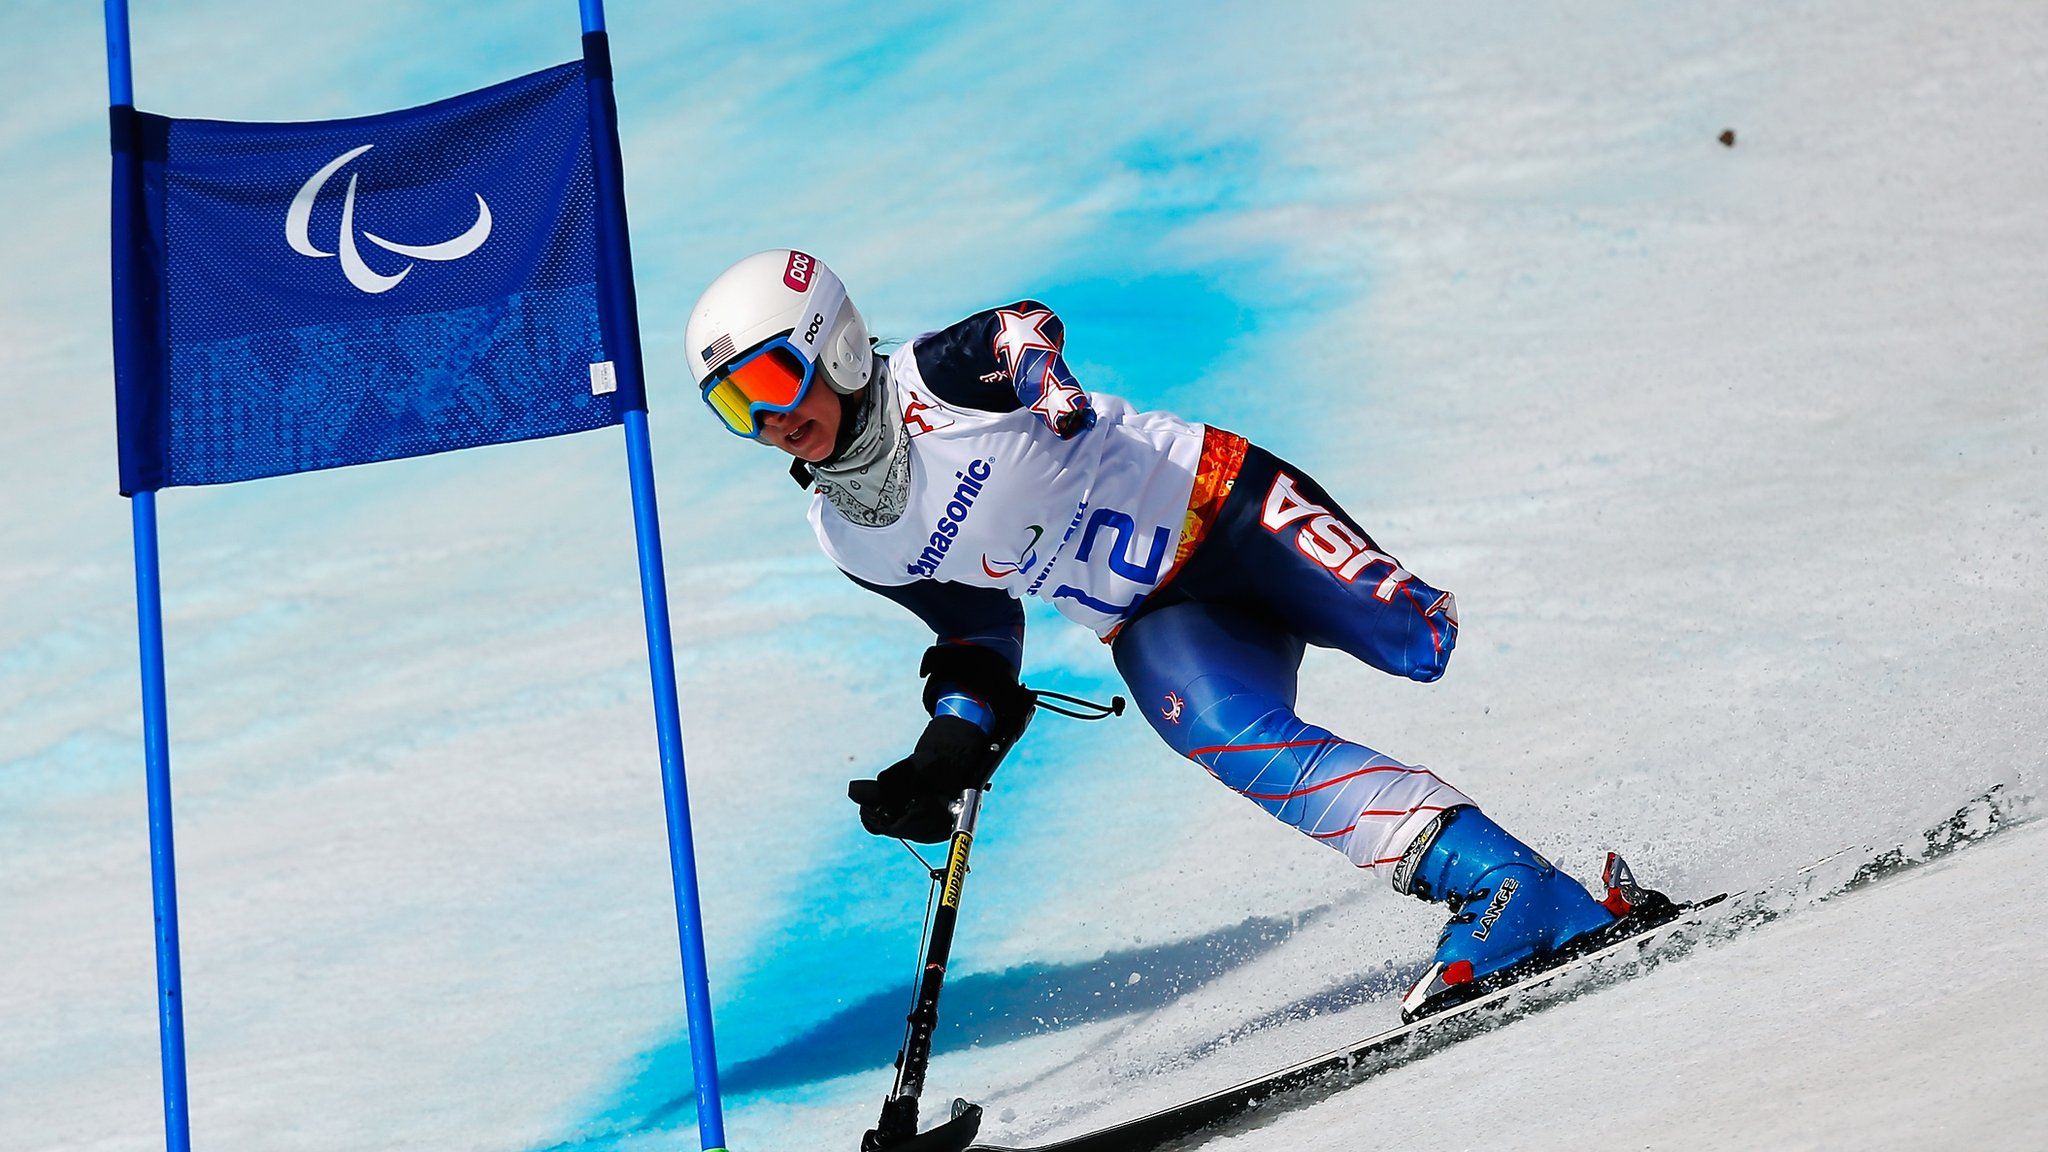 American skier Stephanie Jallen competes in the standing category